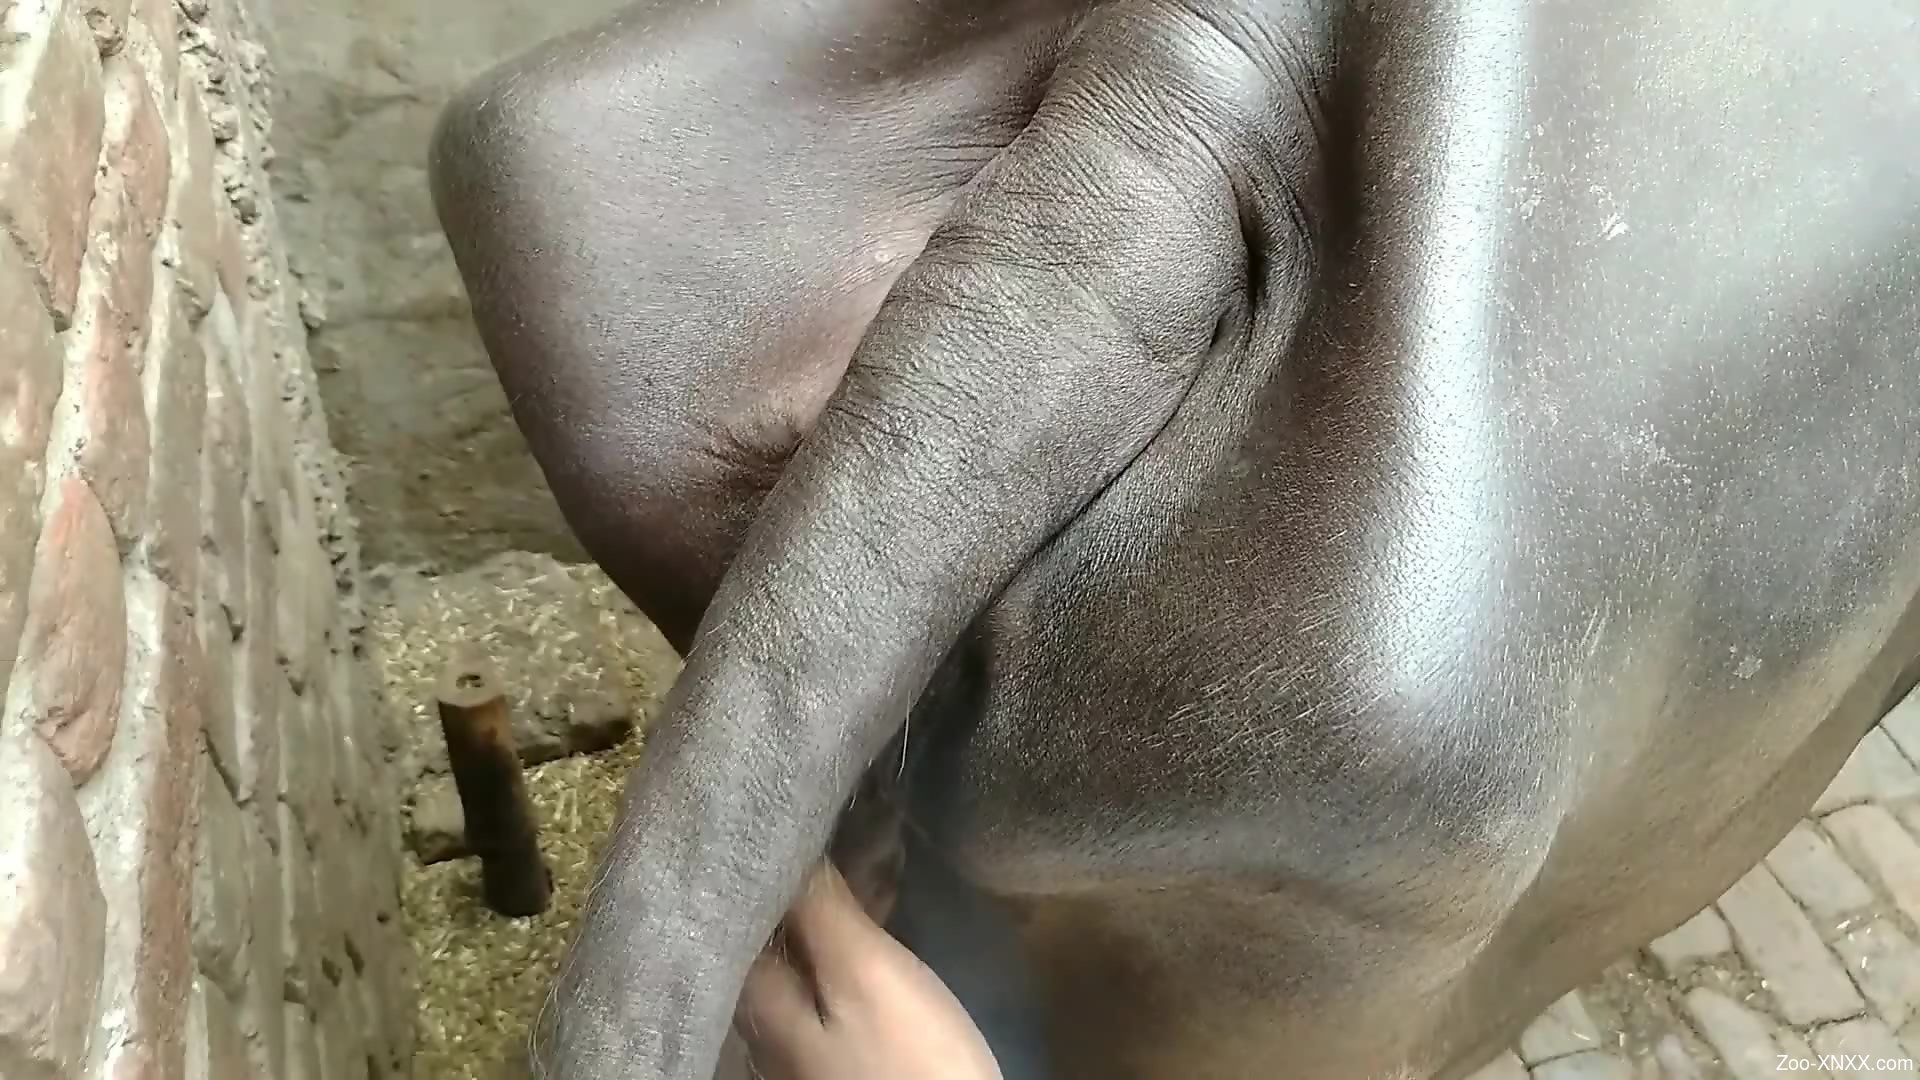 Man wants to fuck this cow's pussy in such a hard mode